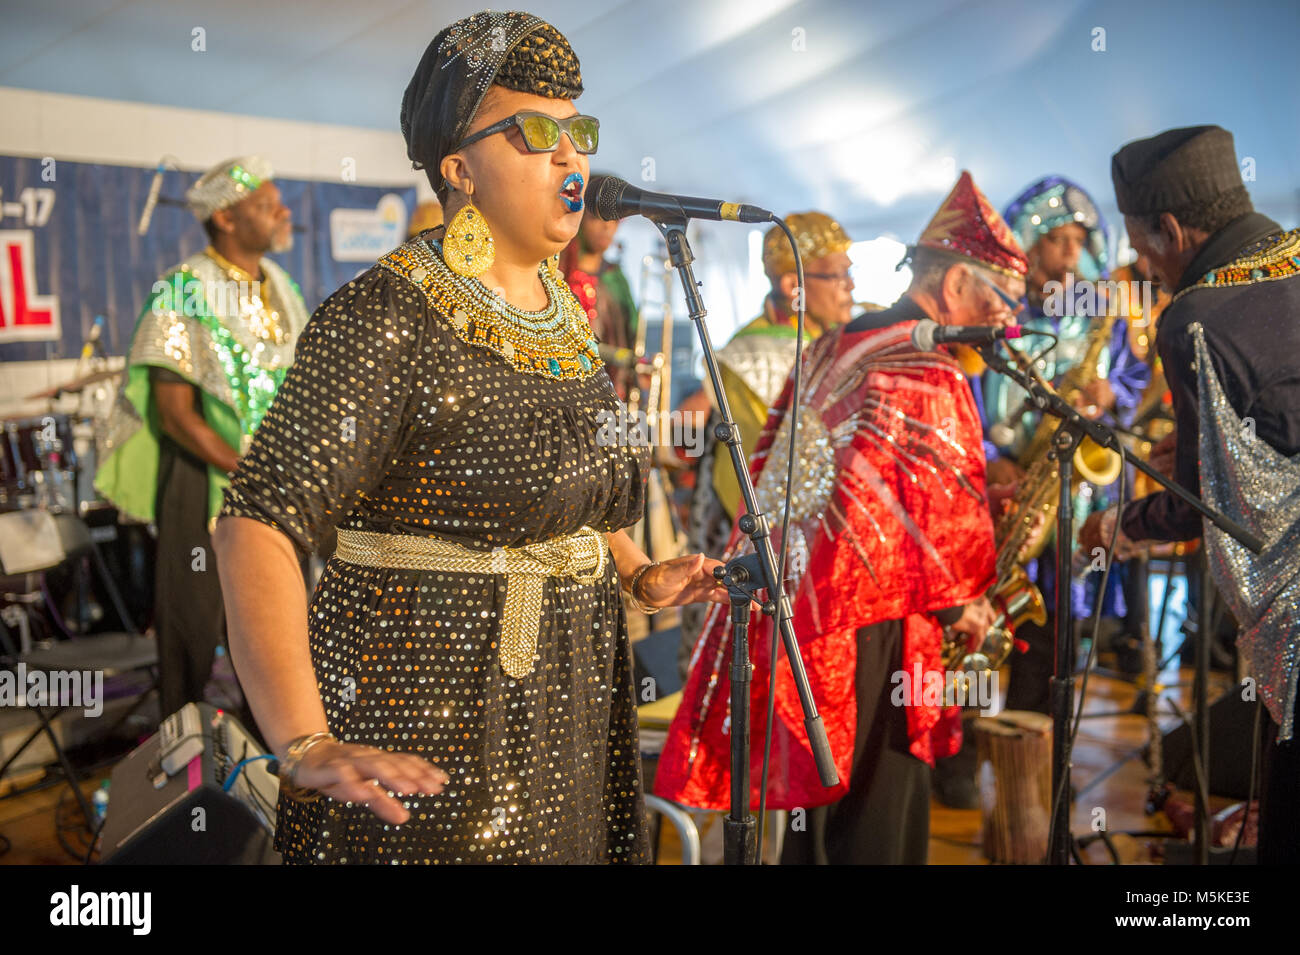 The cosmic musical group Sun Ra Arkestra preforming together on stage for the National Folk Life Festival, Greensboro, North Carolina. Stock Photo